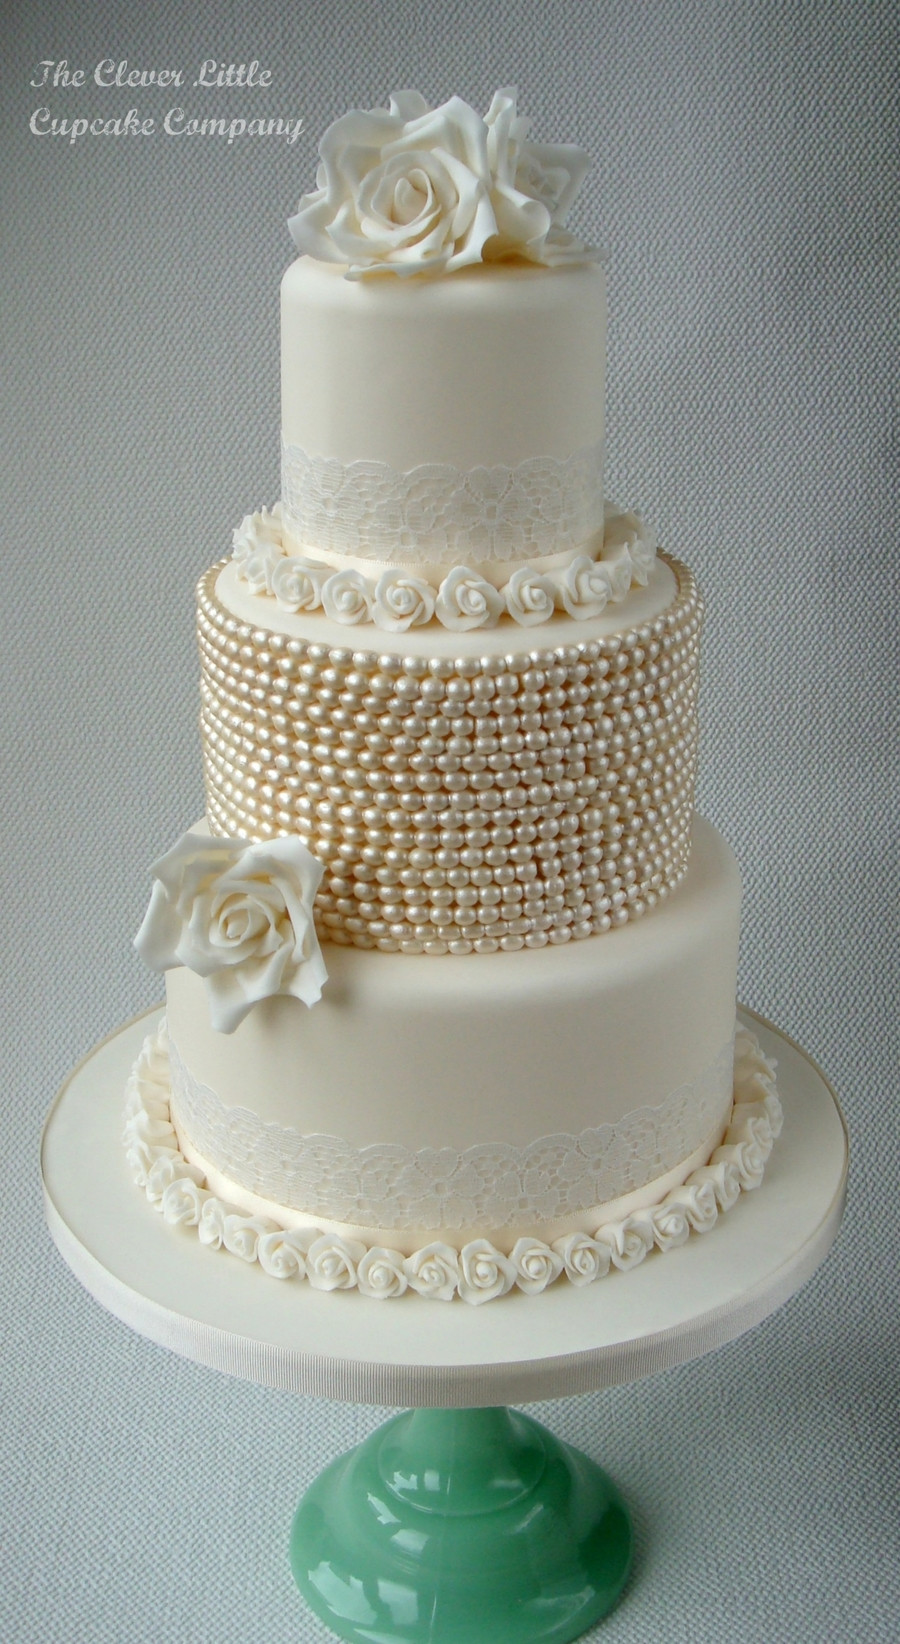 Vintage Wedding Cakes
 Vintage Lace And Pearl Wedding Cake CakeCentral